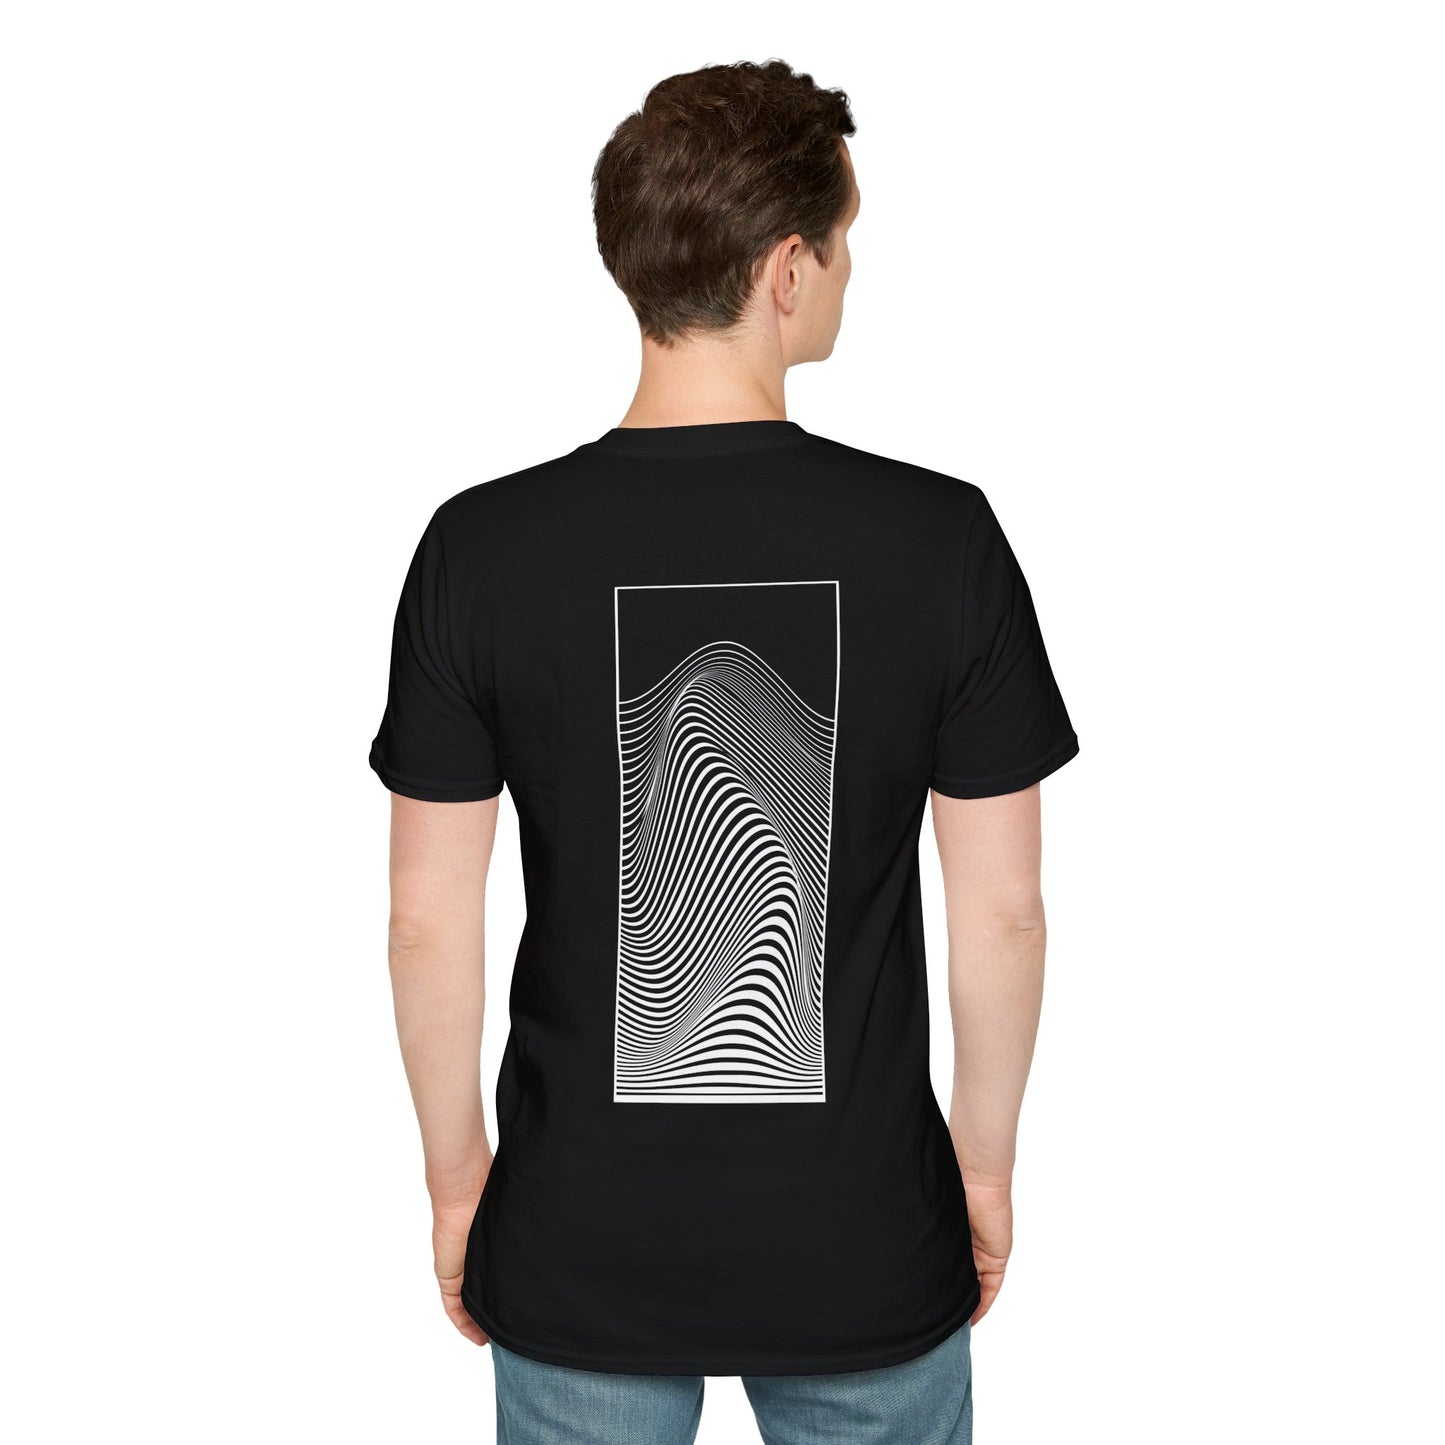 Black T-shirt with a black and white optical illusion design of swirling patterns